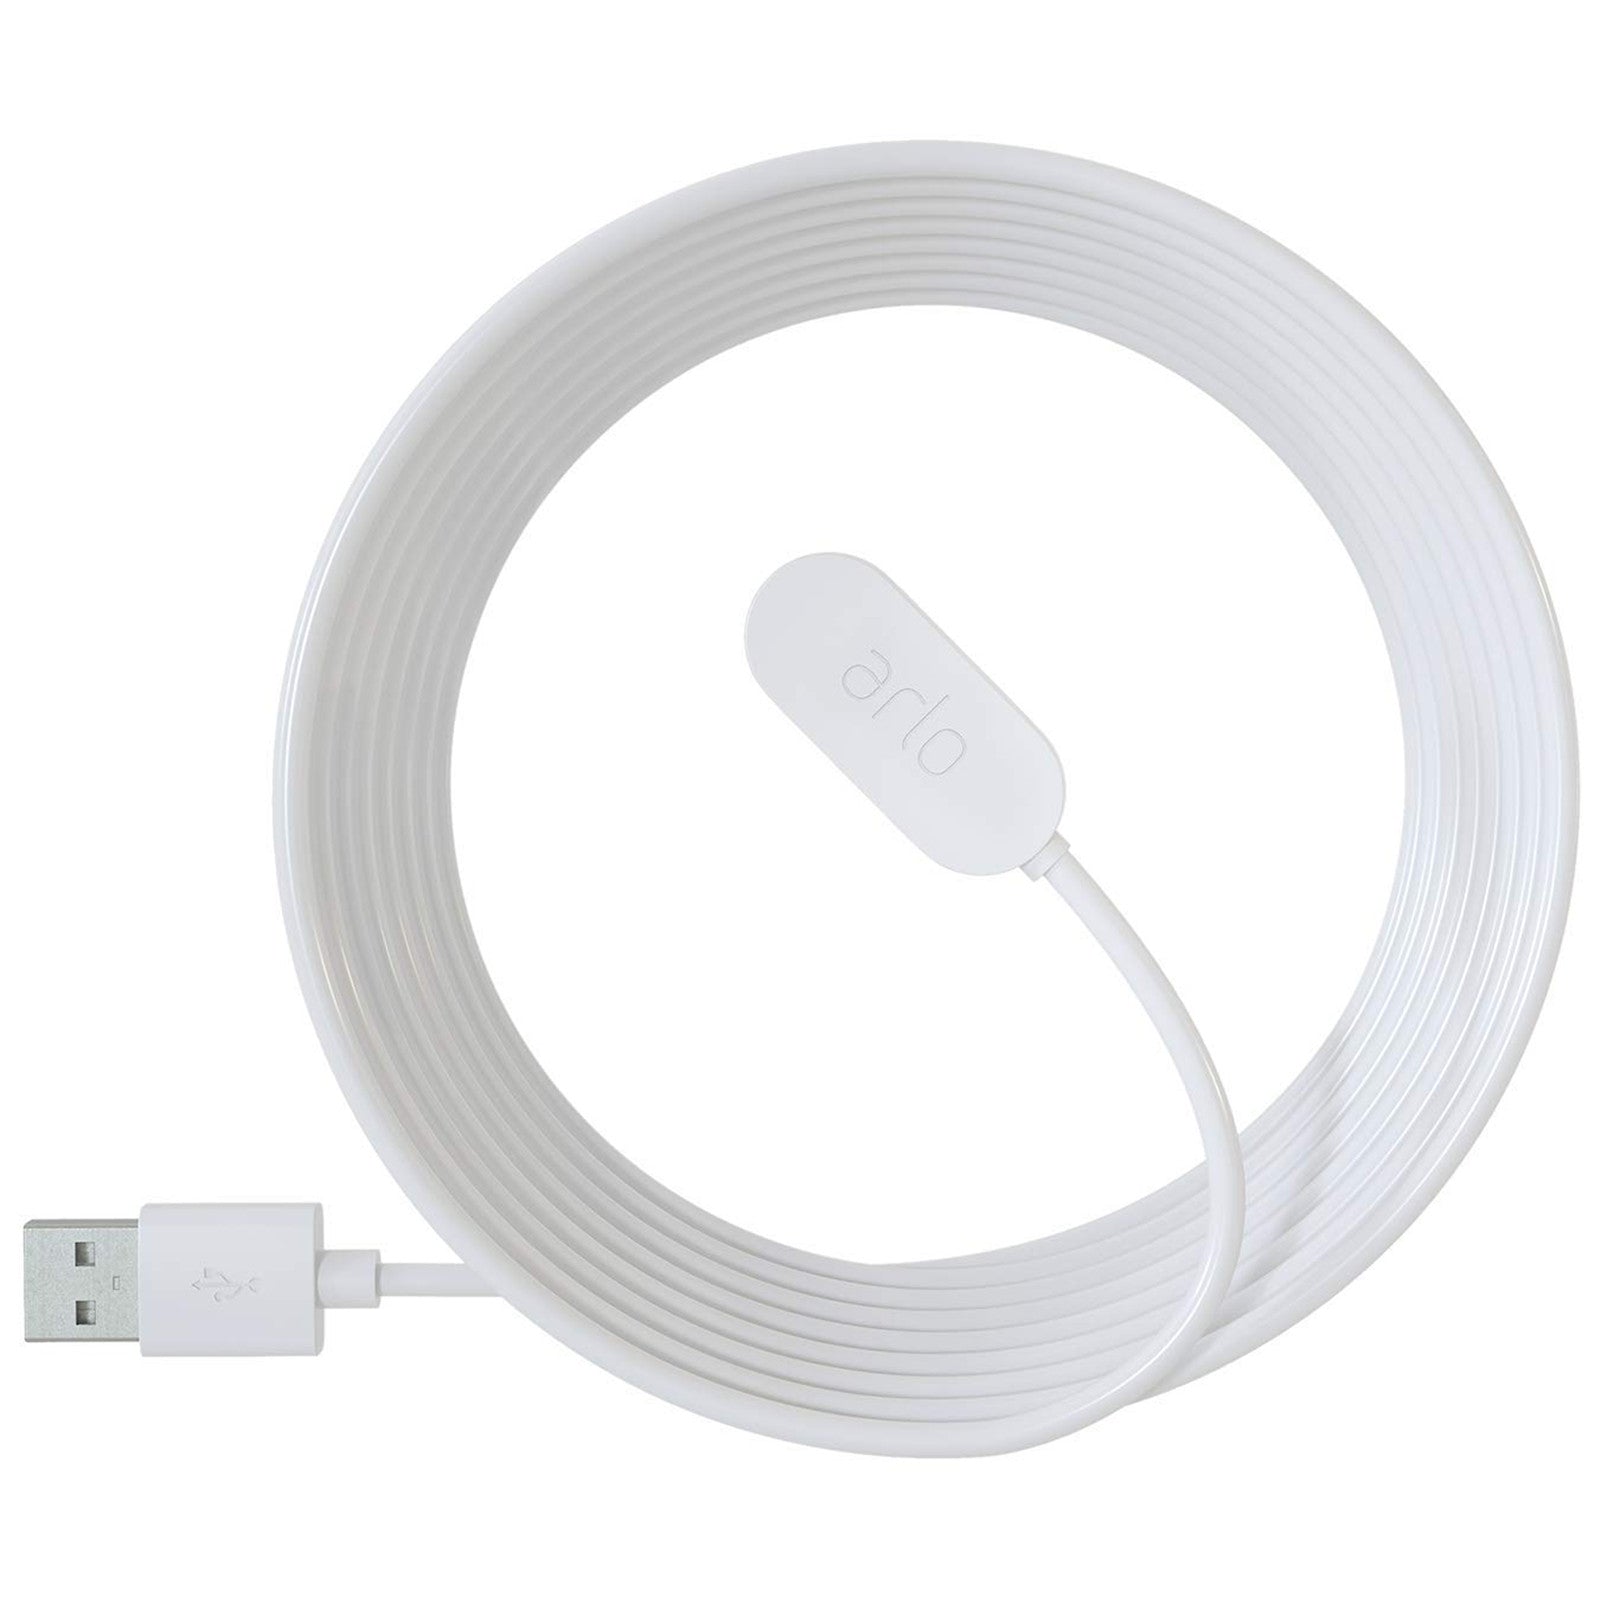 Arlo Ultra Indoor Magnetic Charging Cable.